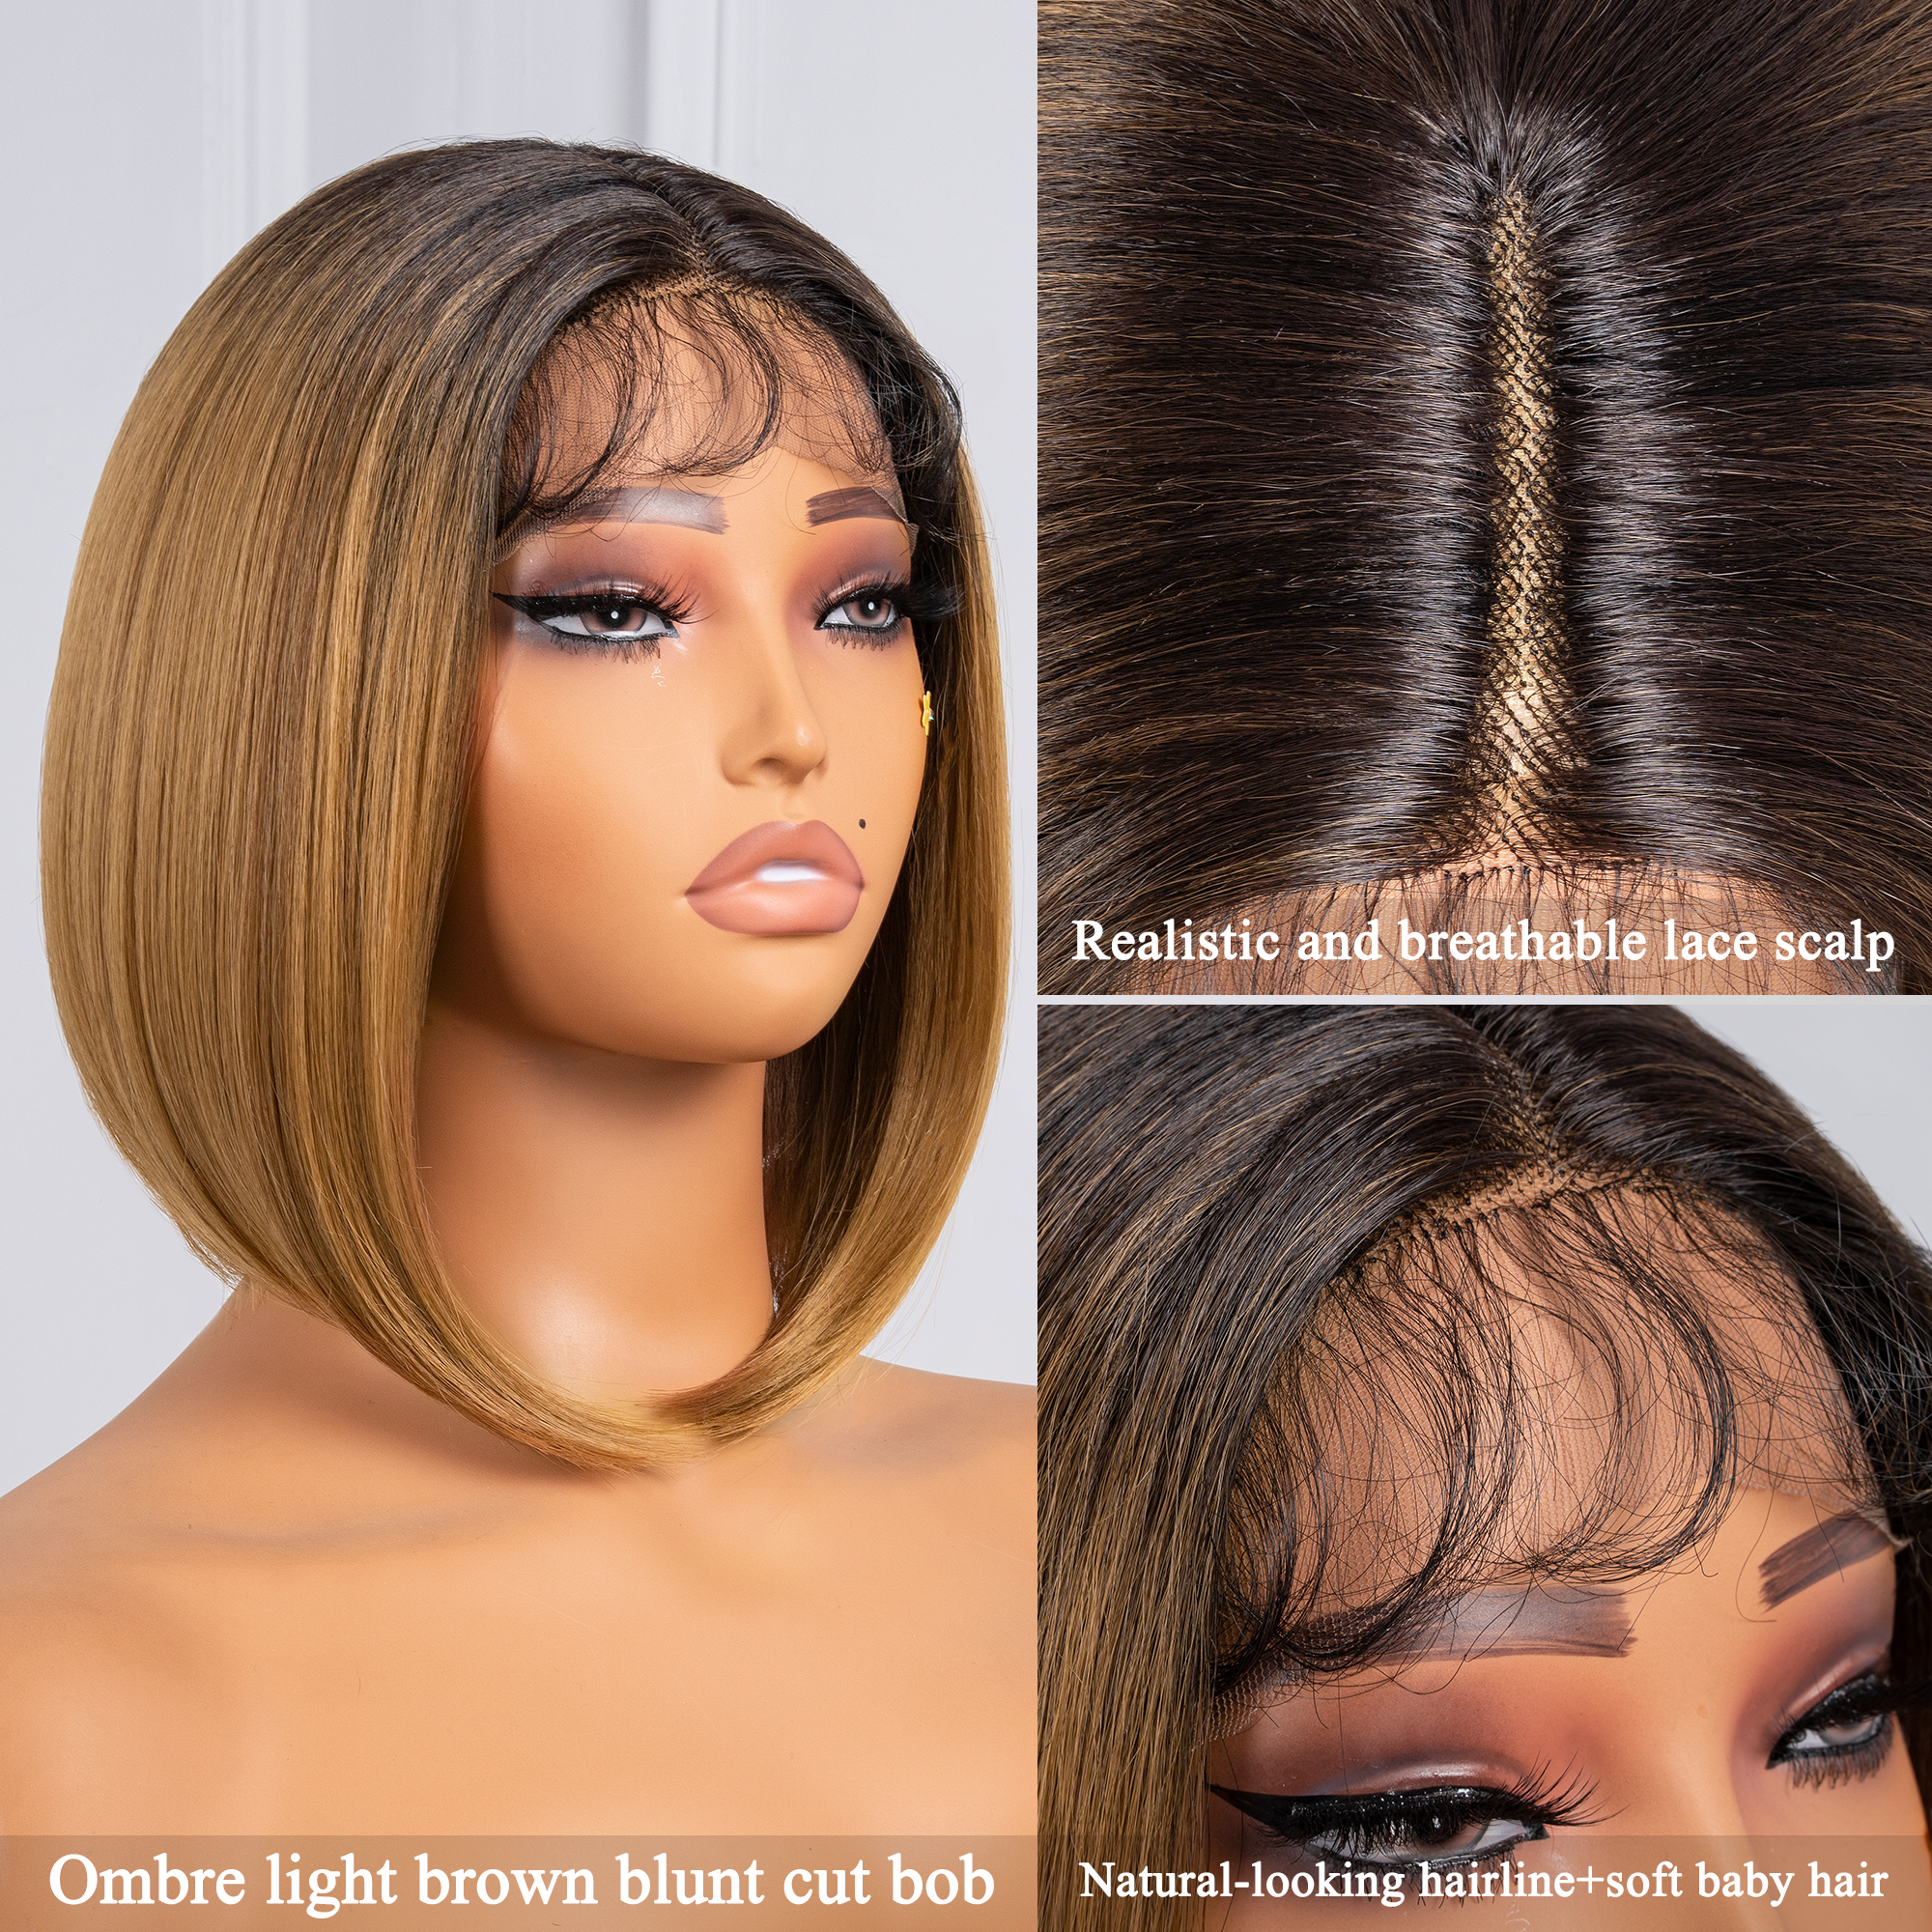 TOYOTRESS AIRY YAKI STRAIGHT T-MIDDLE PART LACE FRONT WIGS WITH BABY HAIR - 10 INCH BOB HUMAN HAIR RIVAL WIG OMBRE BROWN WITH BLACK ROOTS WIG(1027）